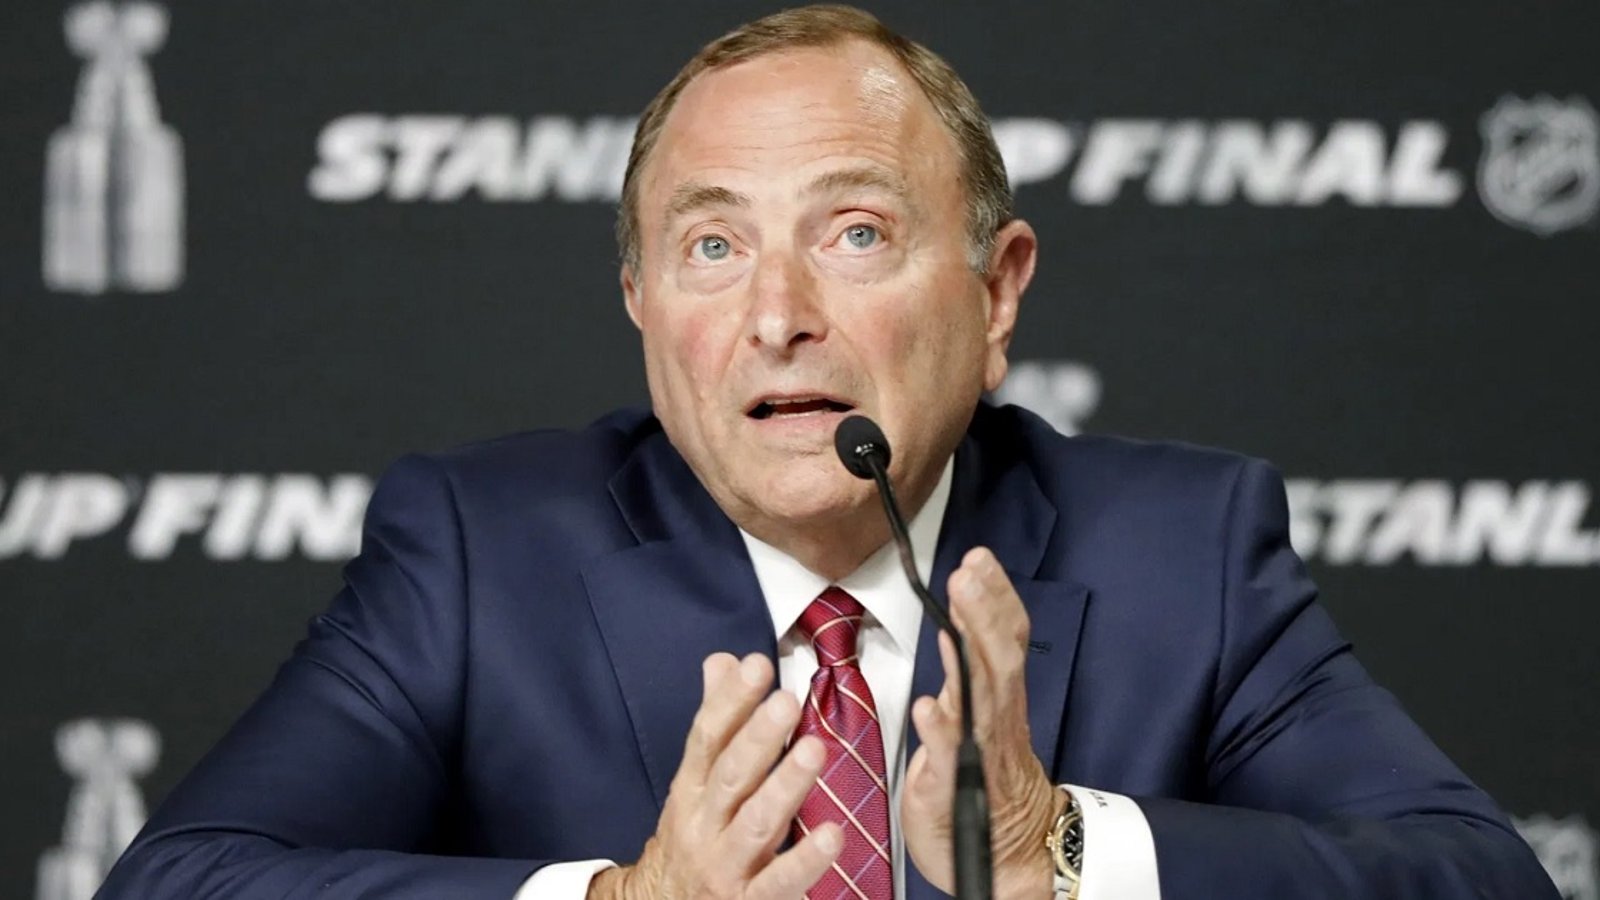 All Canadian Division rumors gain steam after Gary Bettman dodges questions on the topic.